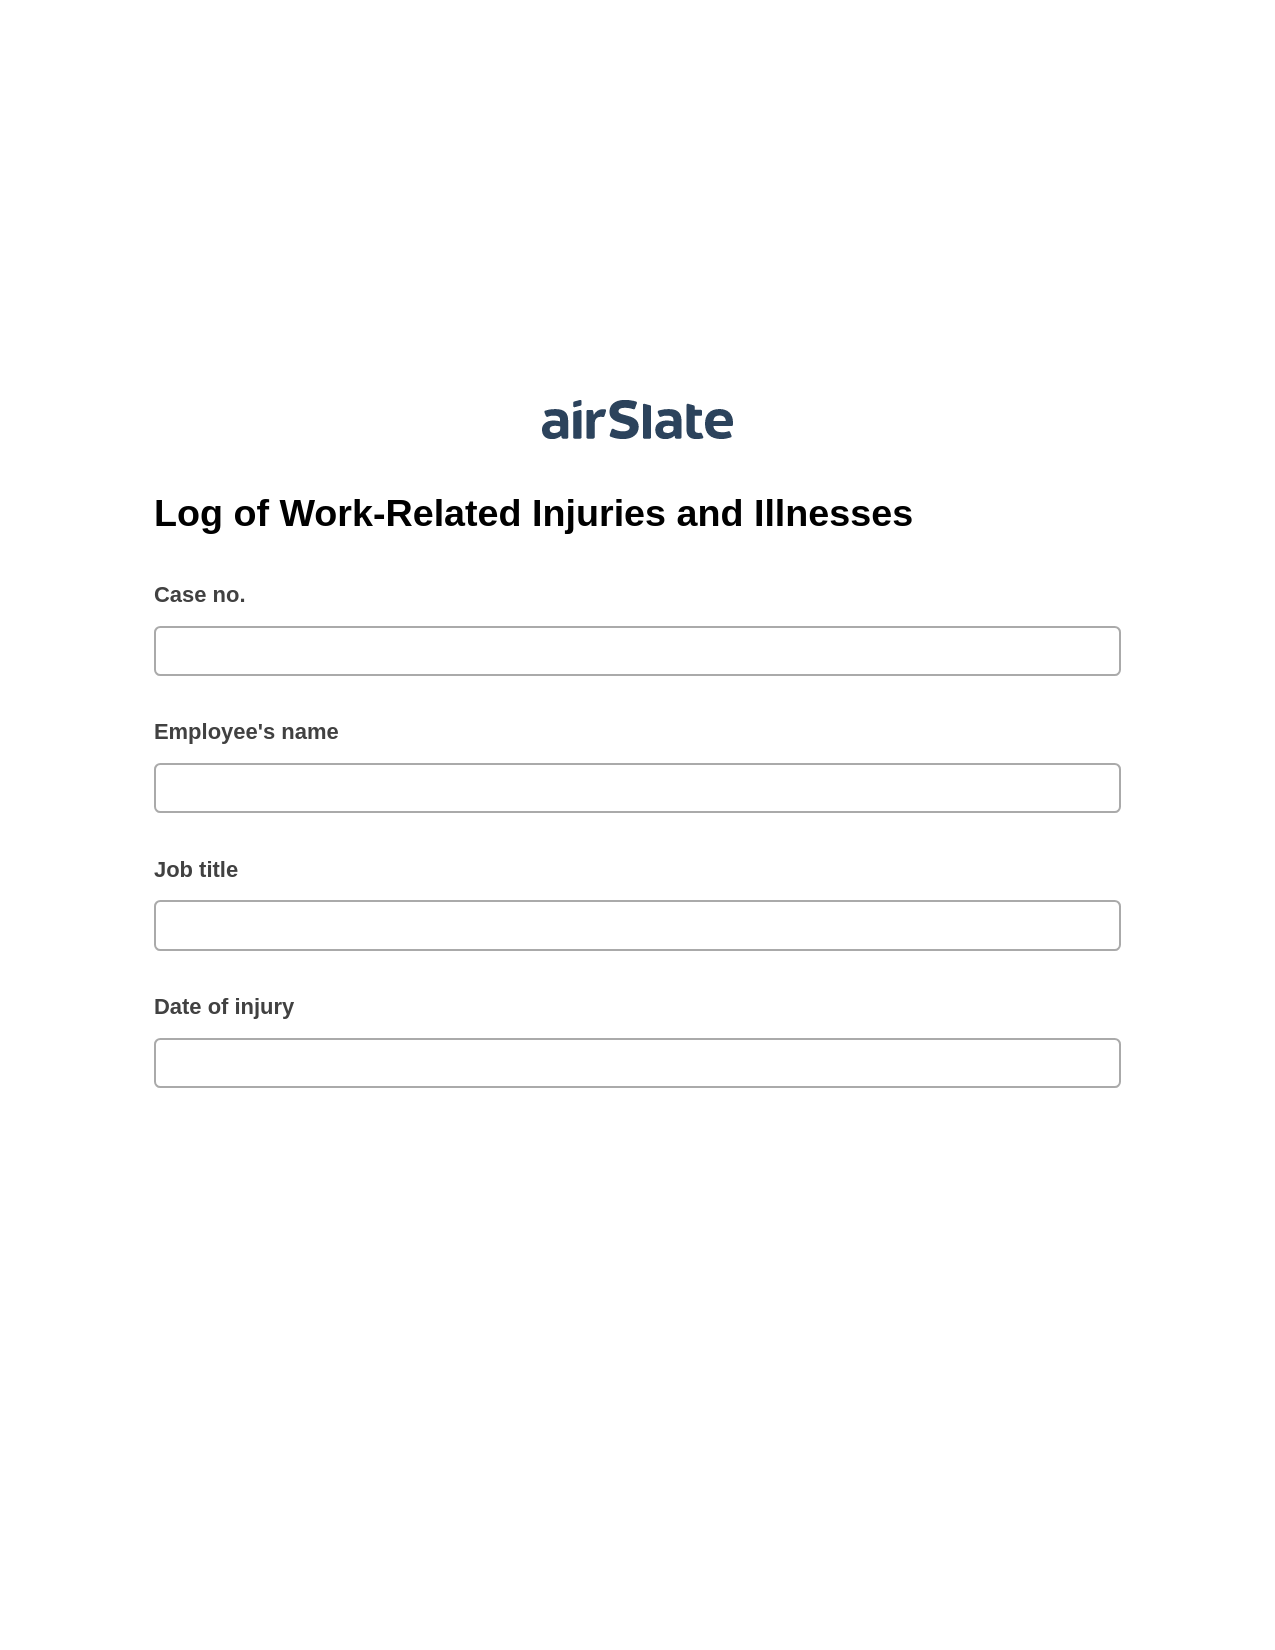 Log of Work-Related Injuries and Illnesses Pre-fill from Office 365 Excel Bot, Send a Slate with Roles Bot, Archive to SharePoint Folder Bot